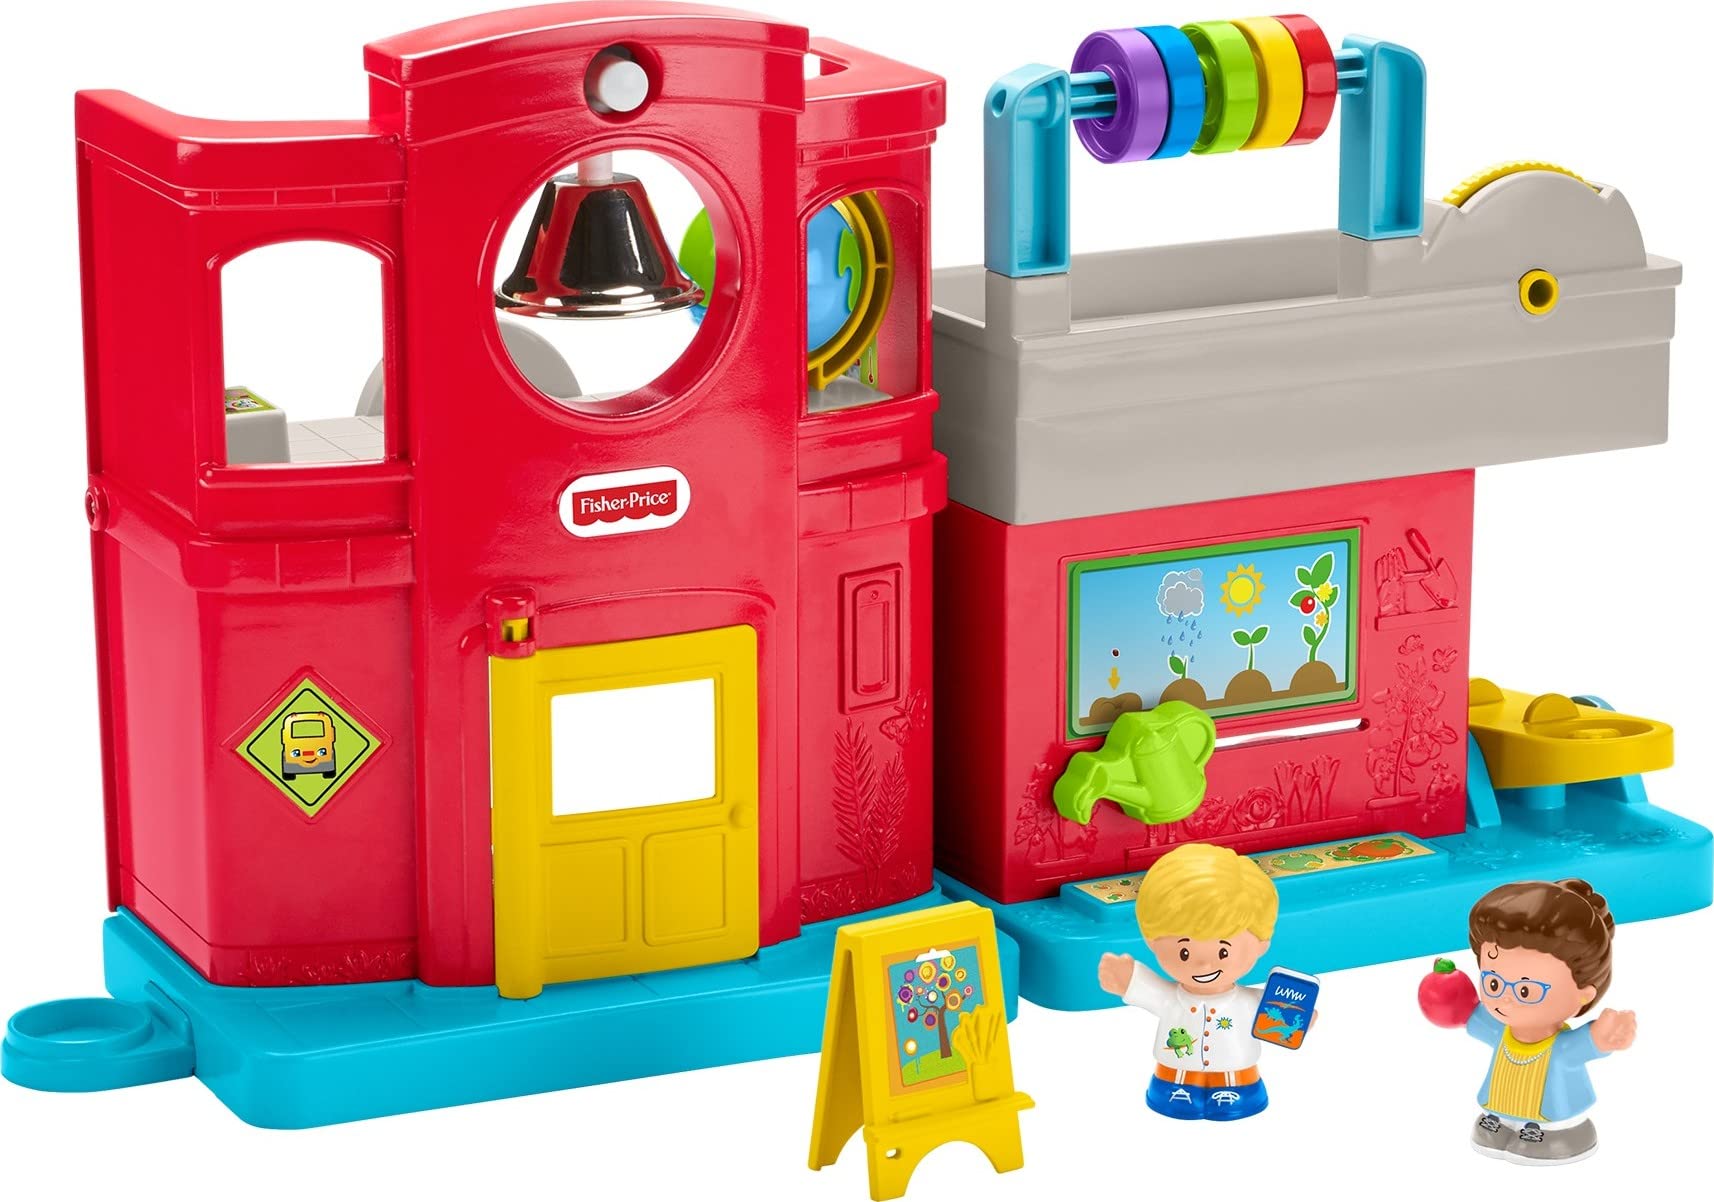 Fisher-Price Little People Toddler Playset Friendly School Musical Toy with Figures & Accessories for Ages 1+ Years (Amazon Exclusive)